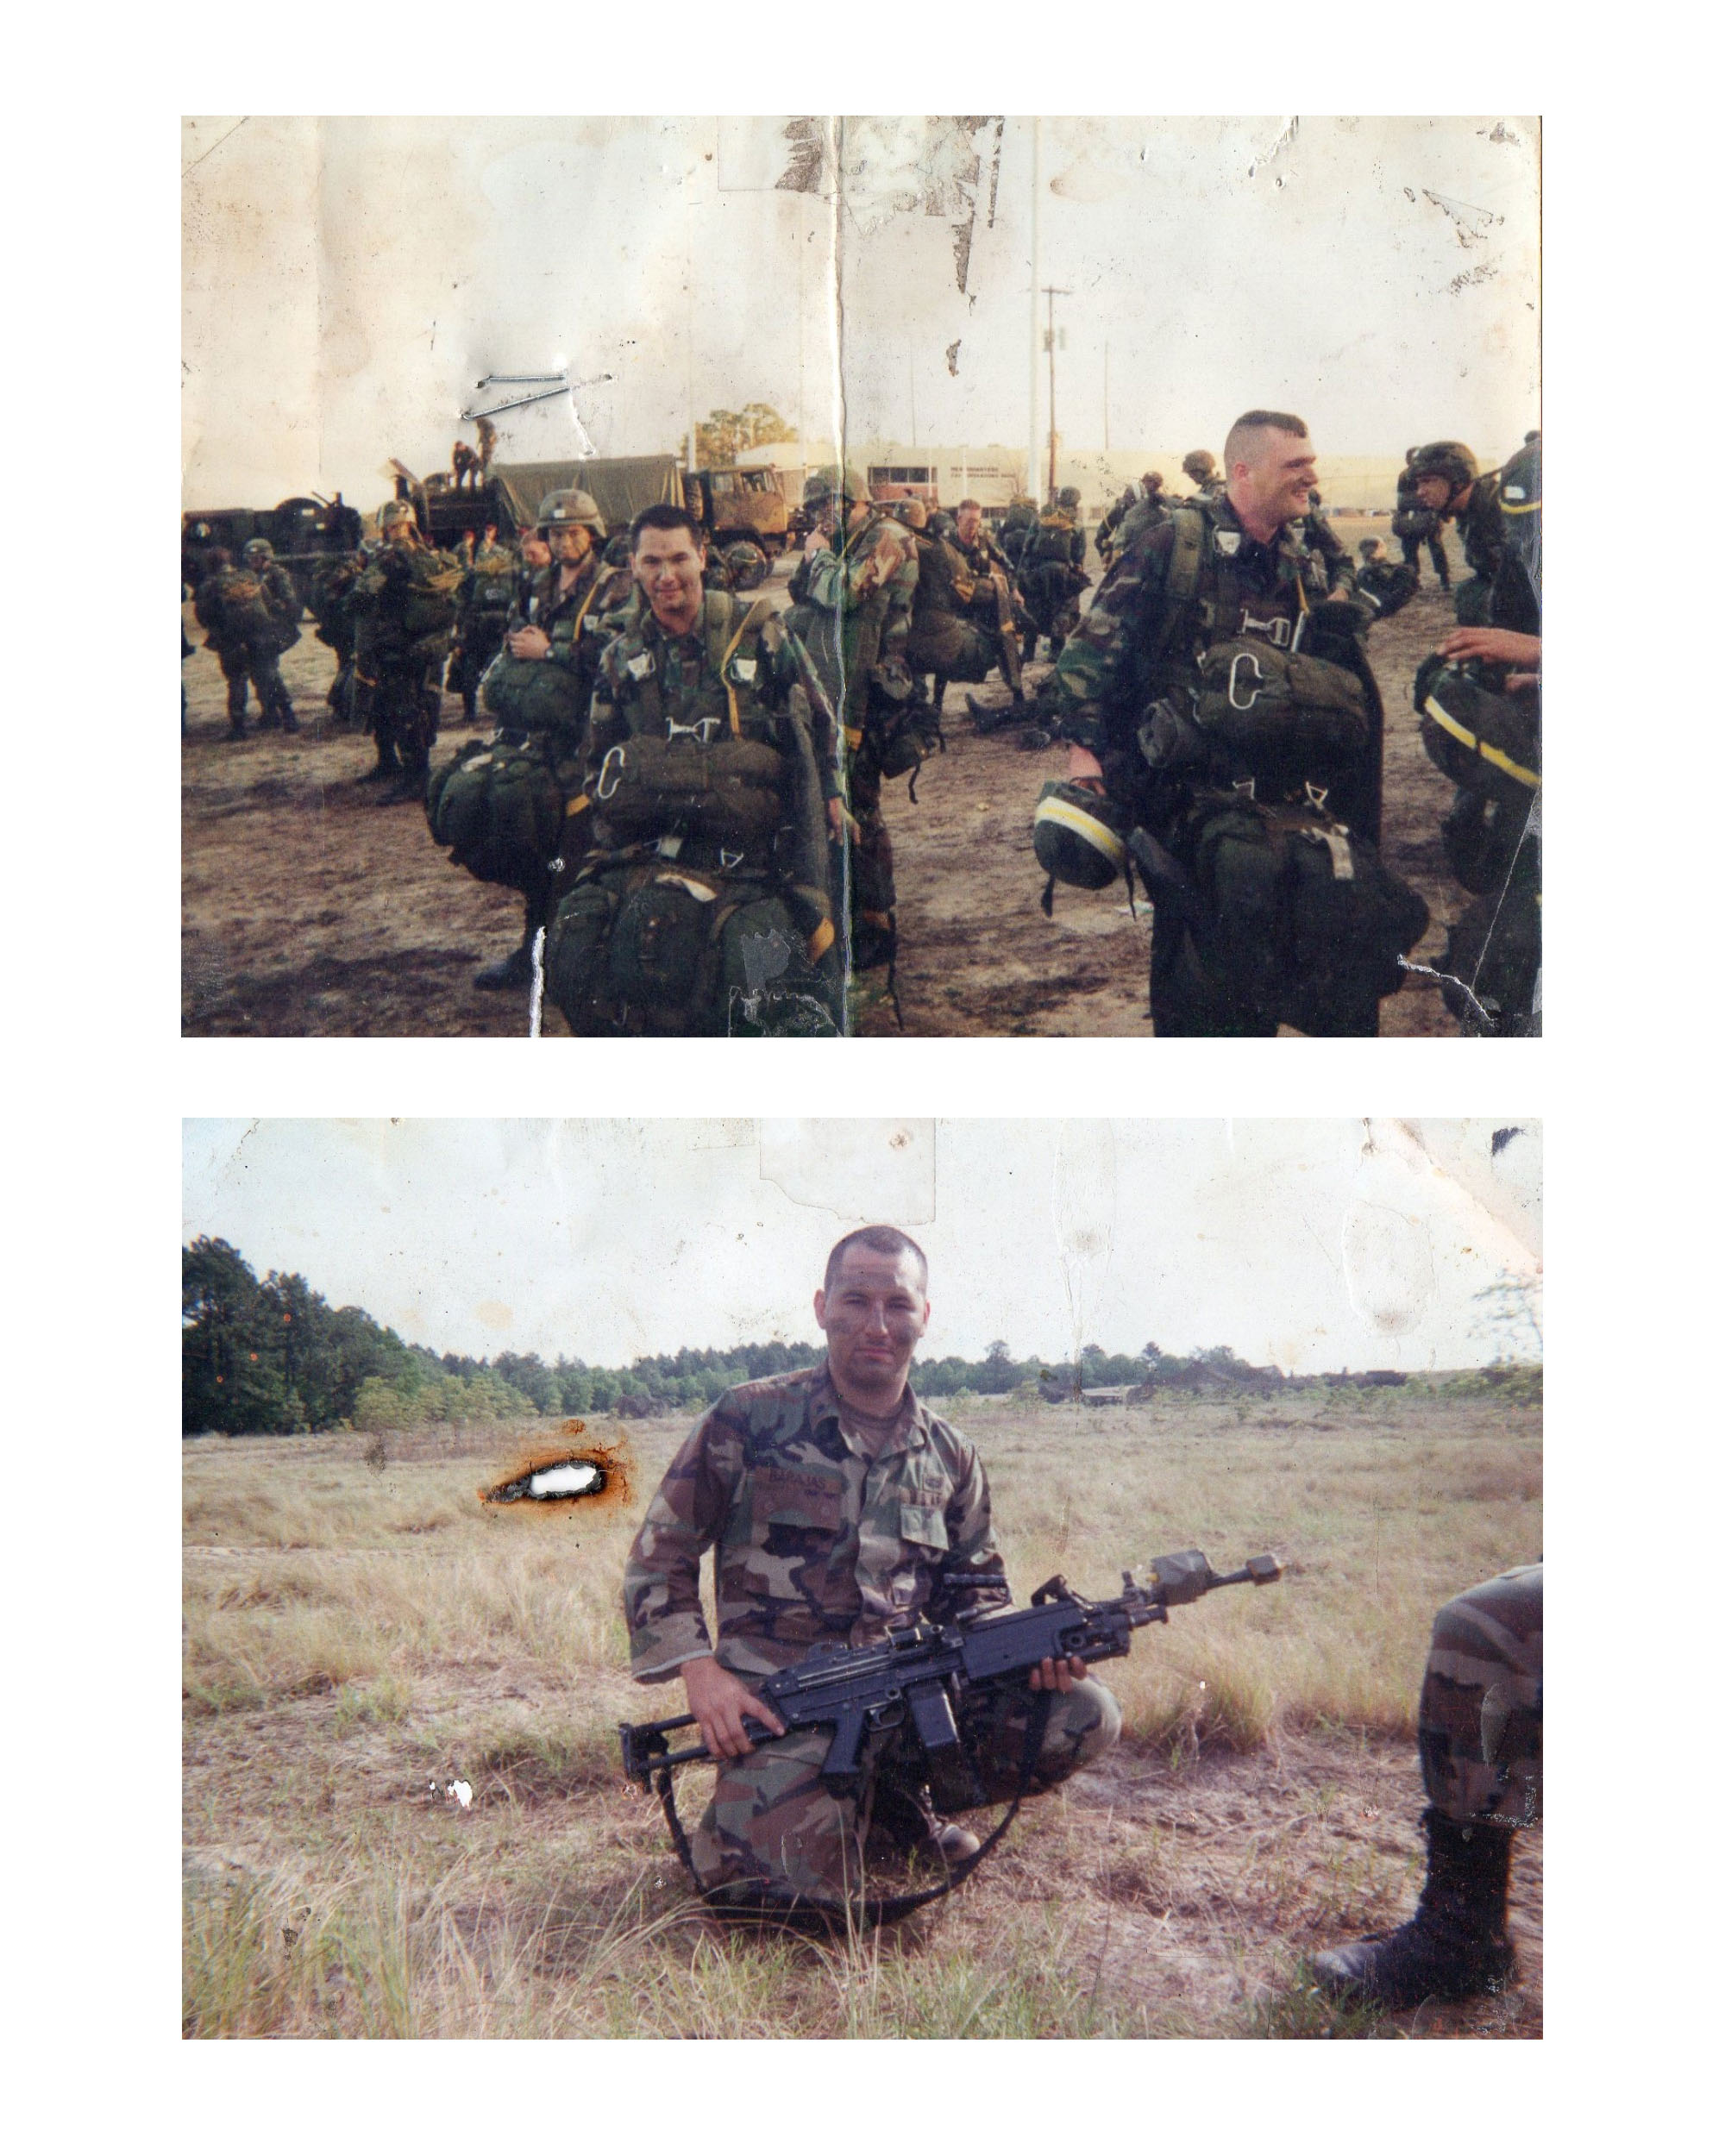 82nd Airborne Divison – Fort Bragg, NC. Images courtesy of Hector Barajas.